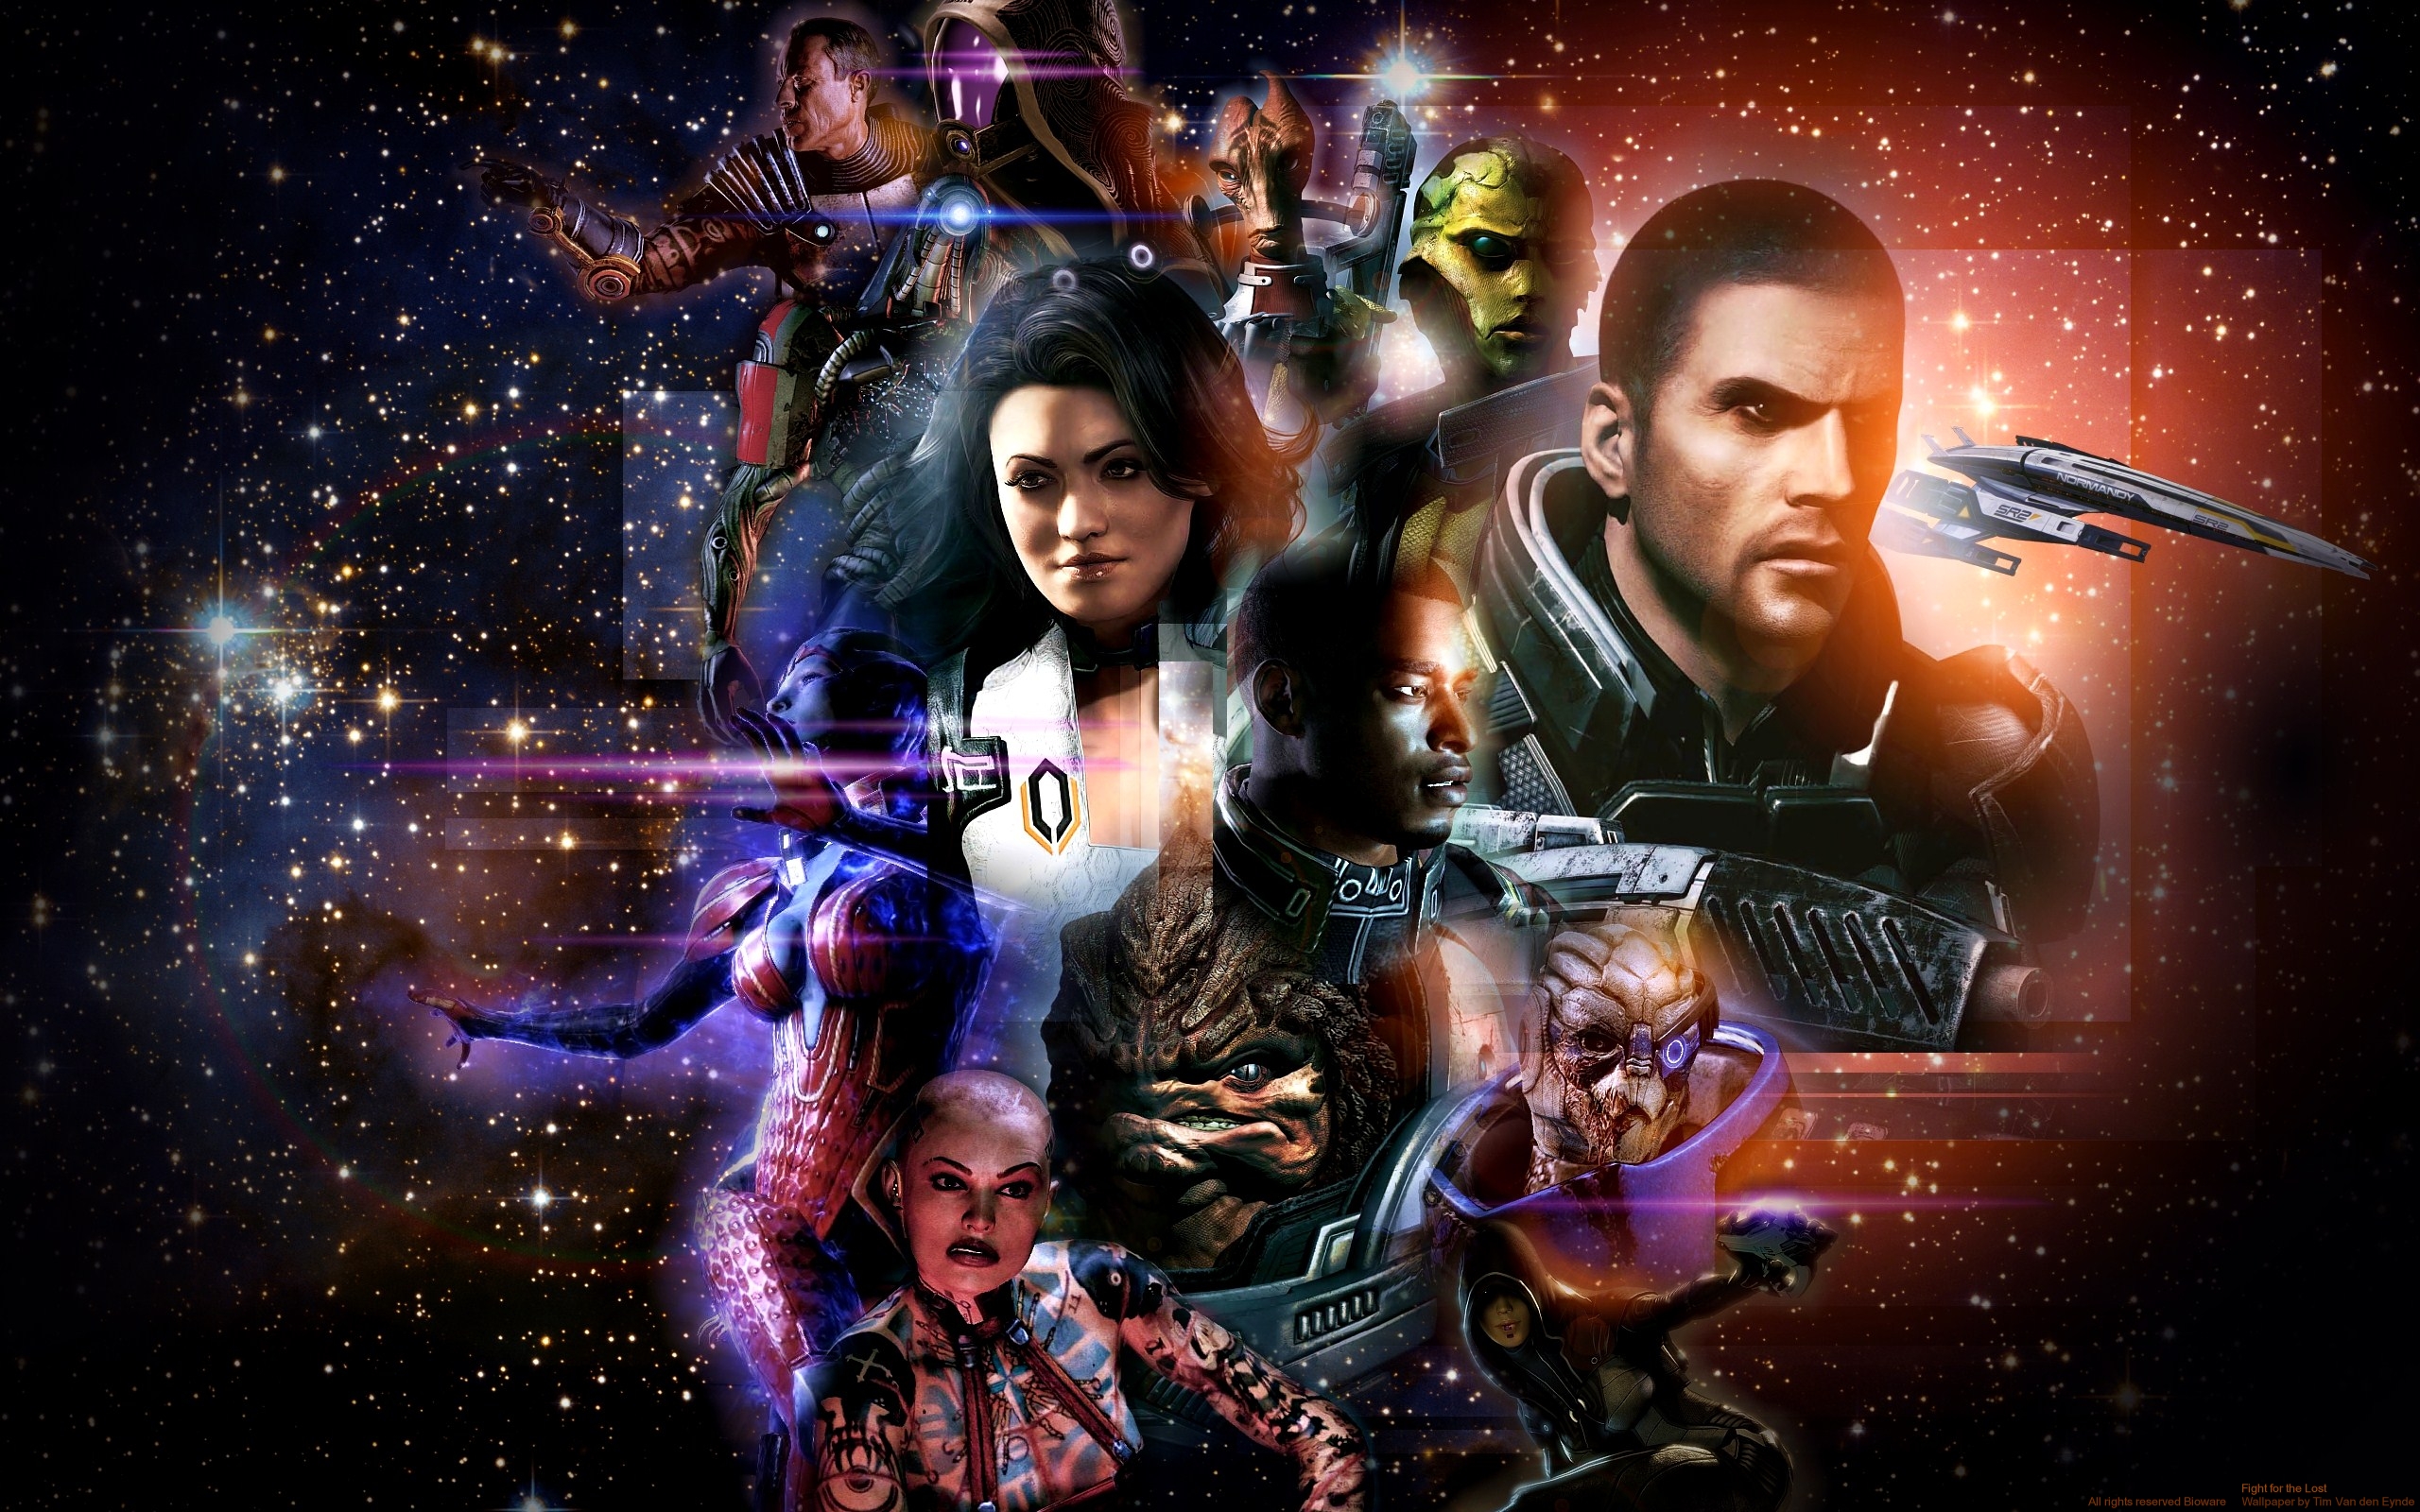 Mass Effect characters in a space-themed desktop wallpaper.